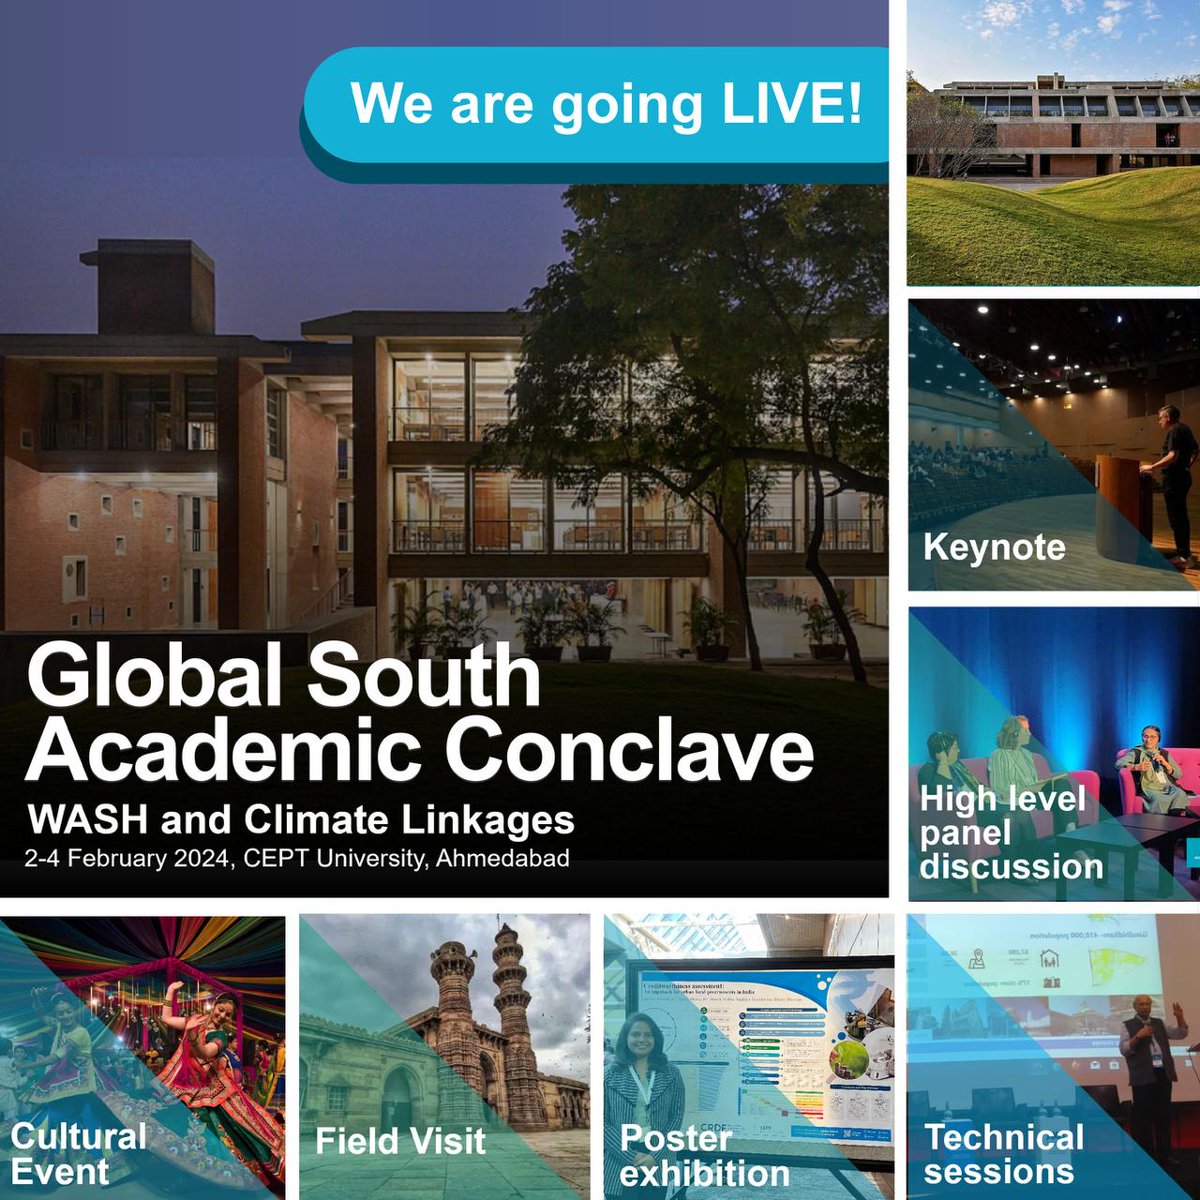 We are live on youtube! Watch here - youtube.com/live/b-7QiGCS0… @fpcept @CeptResearch @CEPTUniversity1 @BMGFIndia @mehta_pani @DineshMehta100 @AasimMansuri @monaiyer2 #GlobalSouthAcademicConclave